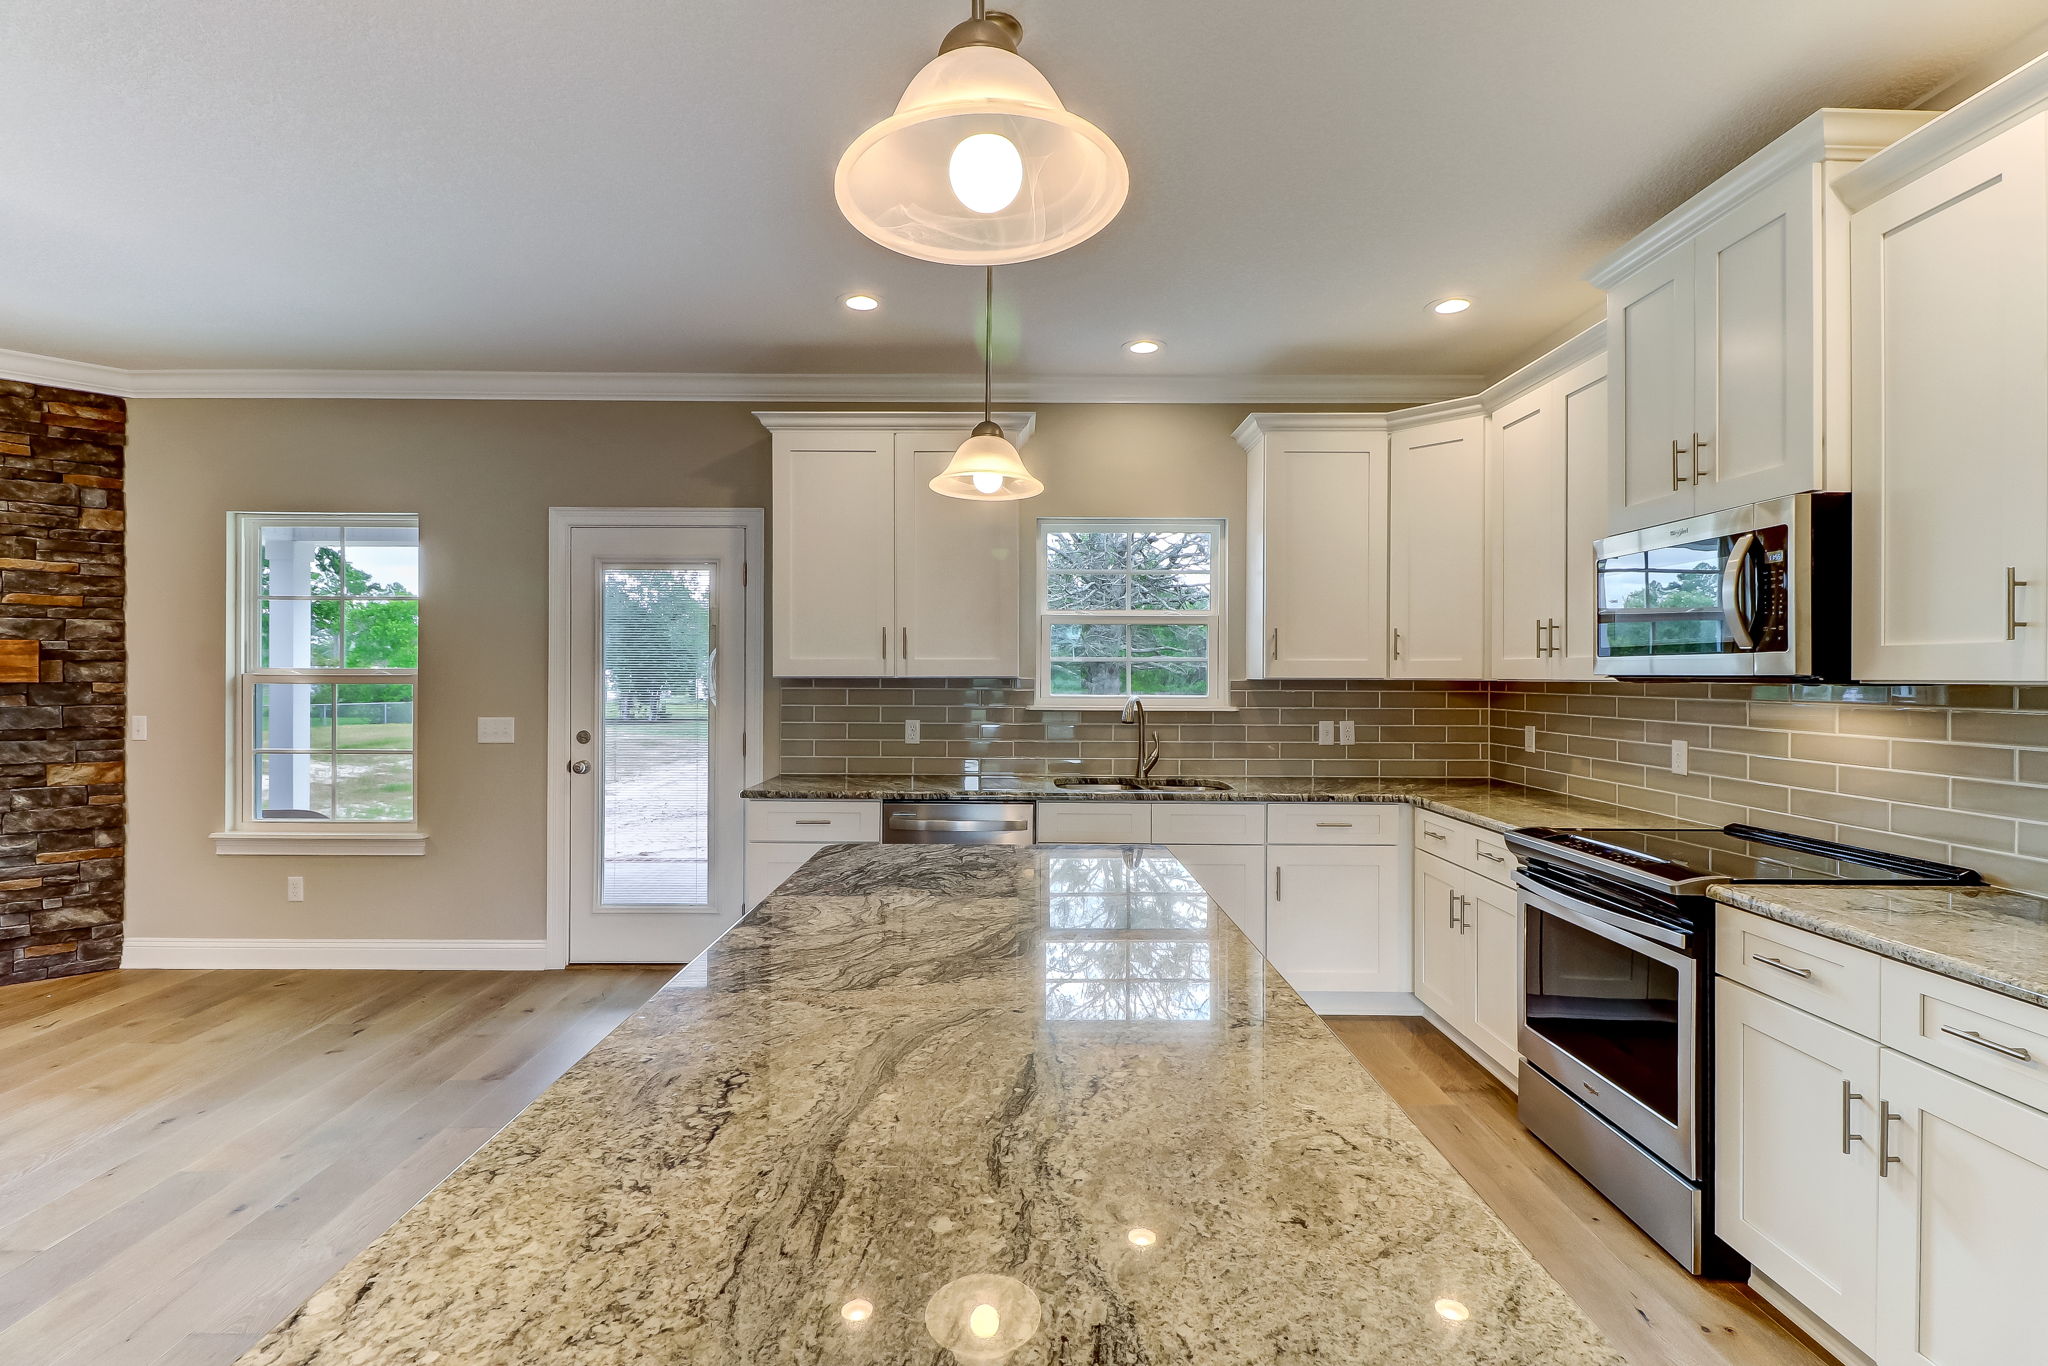 The kitchen is bright and elegant with granite countertops and island, 42' soft close cabinets, and Whirlpool appliances.